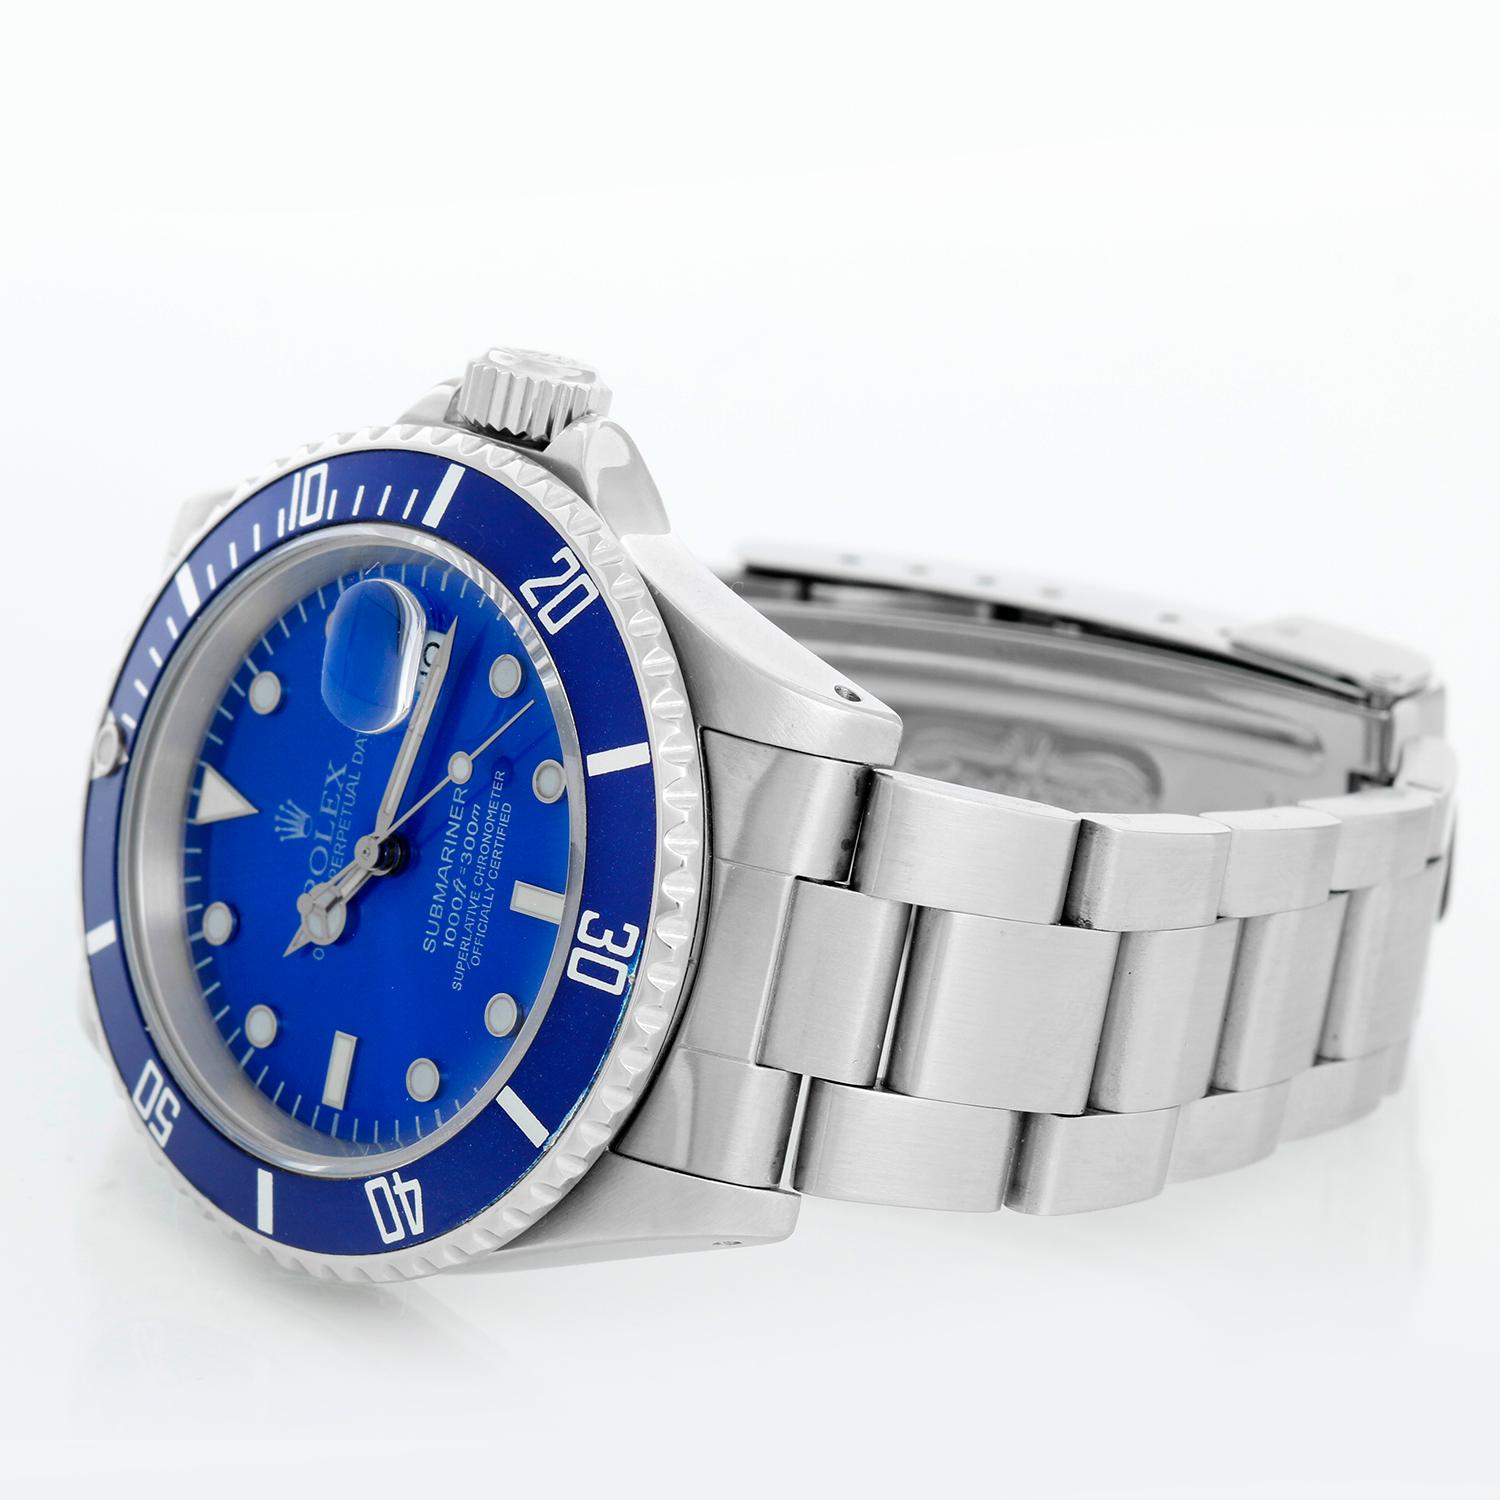 Rolex Submariner 16610 Stainless Steel Men's Watch - Automatic winding, 31 jewels, Quickset, sapphire crystal. Stainless steel case; rotating bezel with blue insert. Custom Blue dial with luminous hour markers. Stainless steel Oyster bracelet with